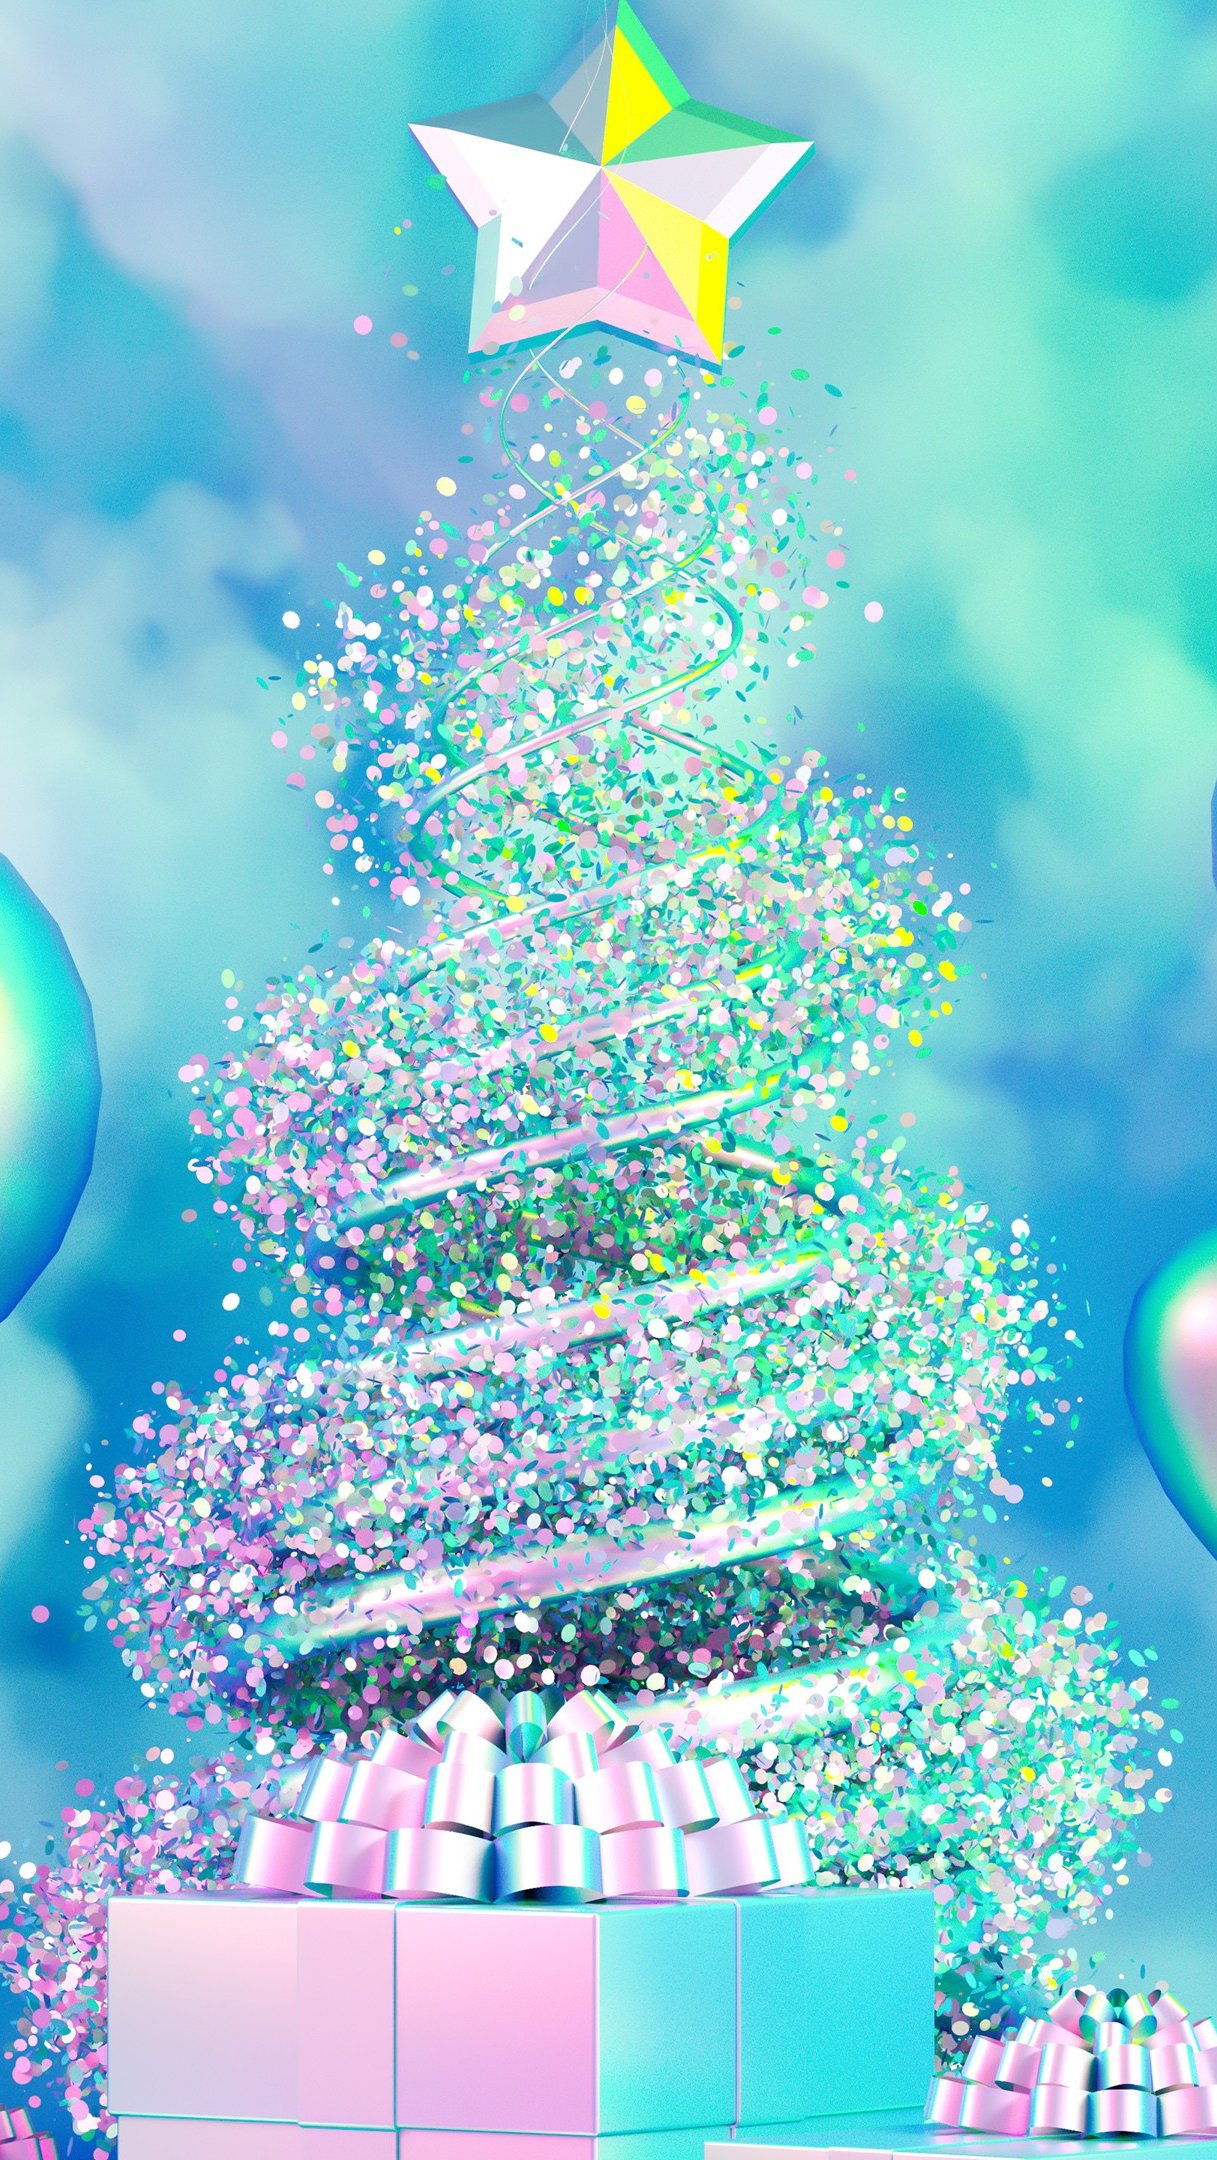 Christmas Tree Desktop Wallpaper Iphone, Android - Happy New Year 2020 - HD Wallpaper 